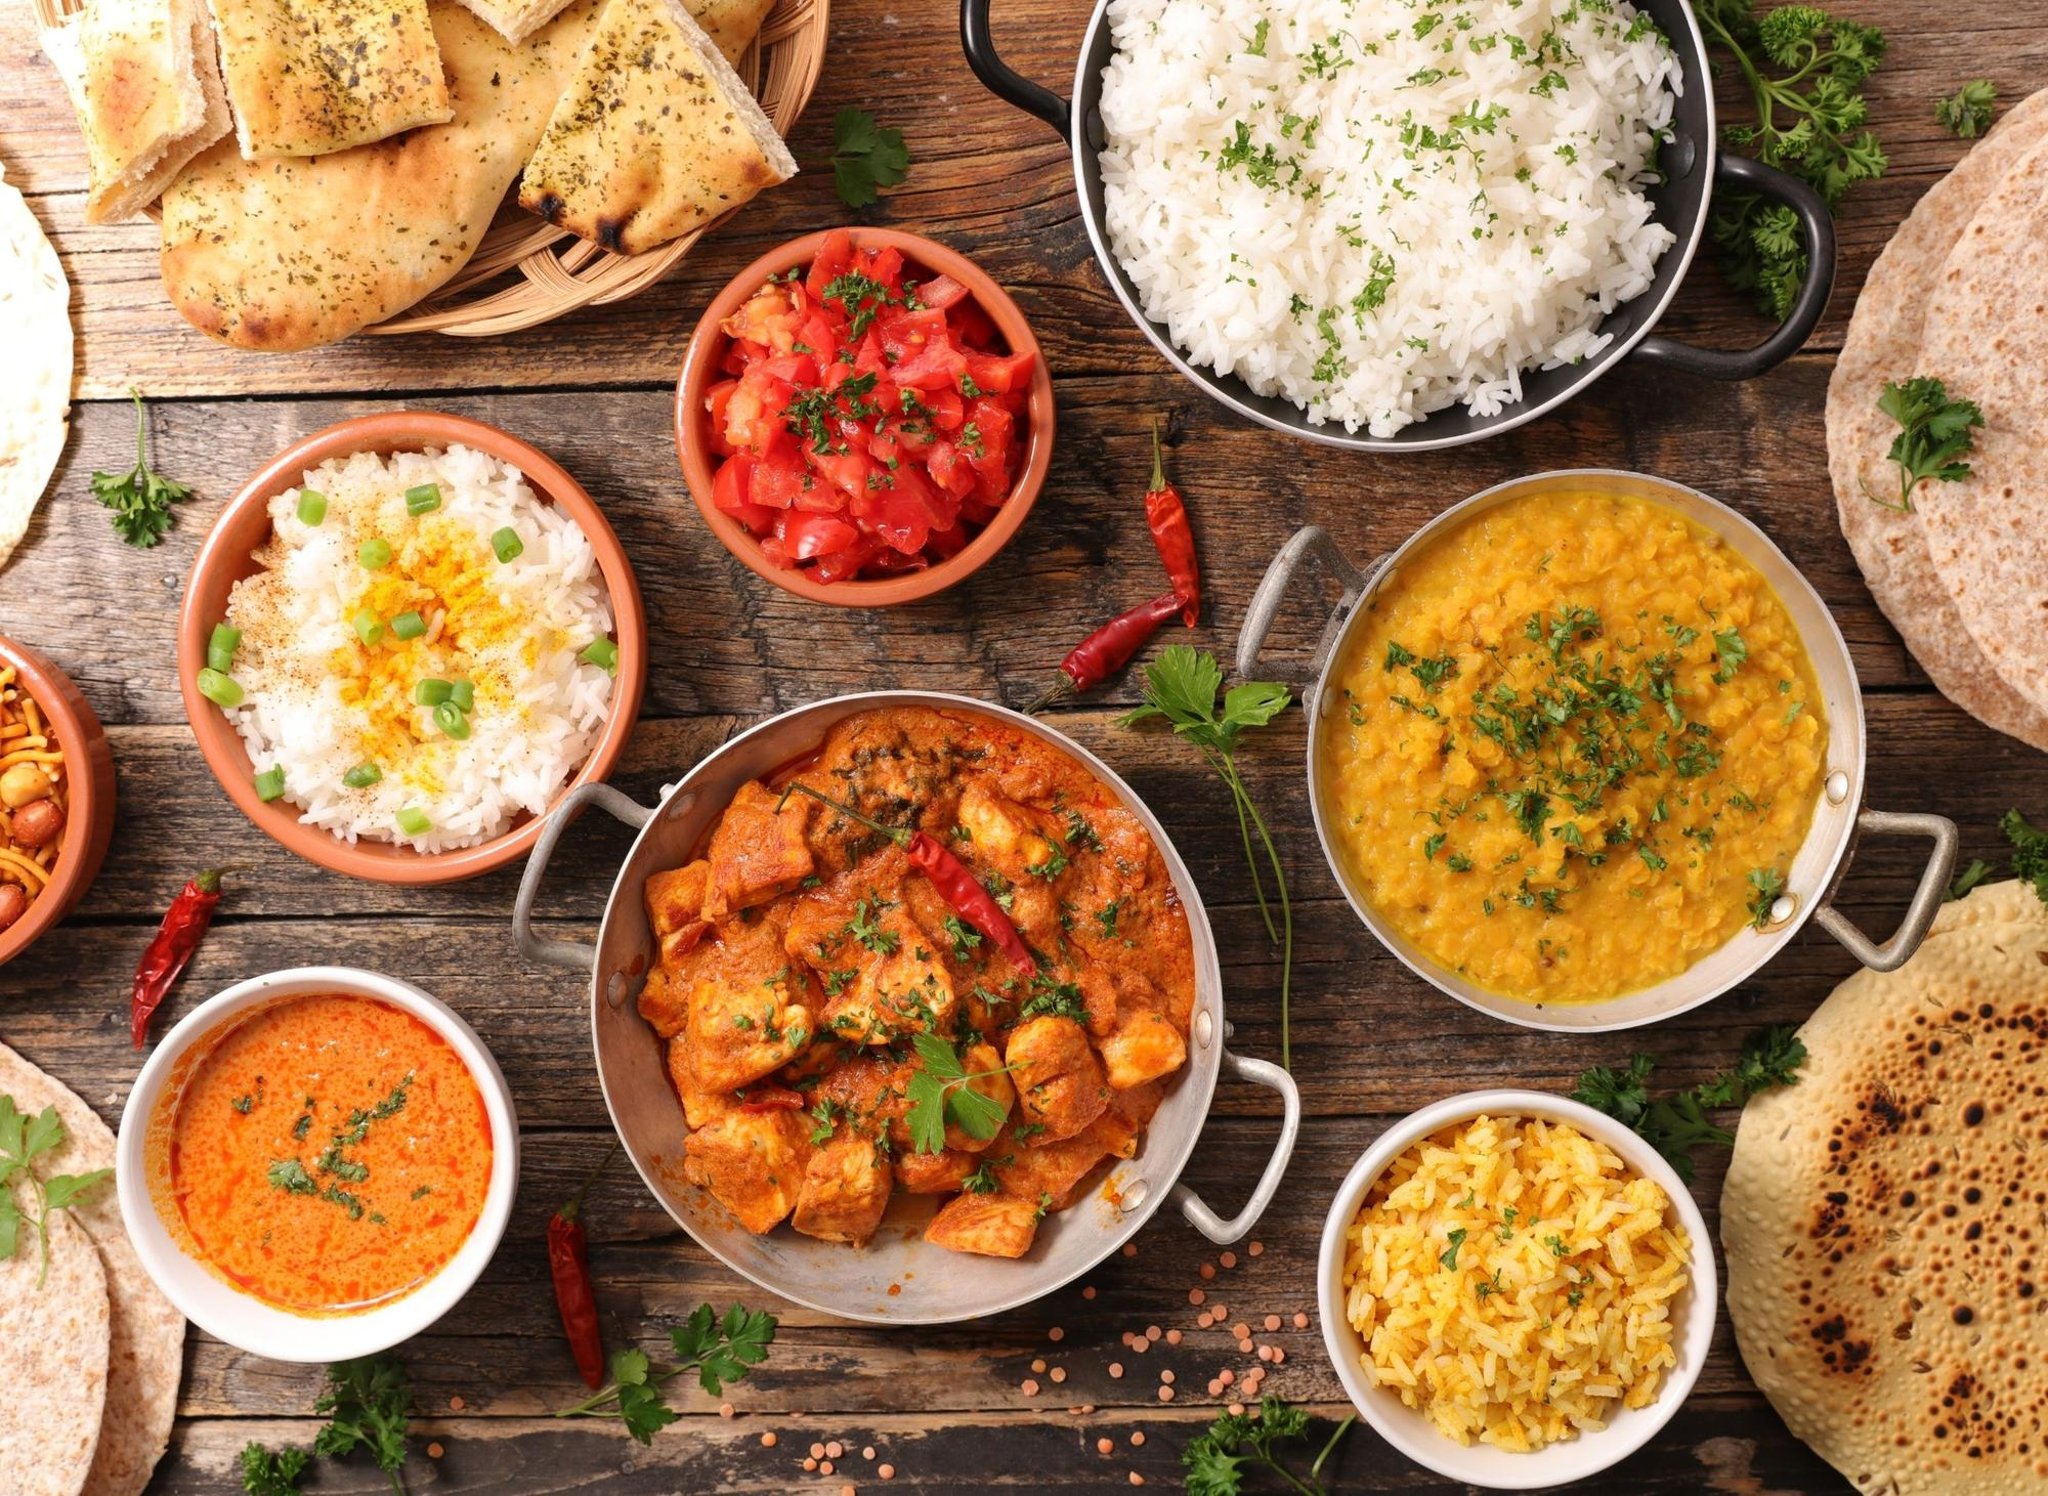  Of The Best Indian Restaurants And Takeaways To Get A Curry In Glasgow According To Tripadvisor The Scotsman - Indian Restaurant Near Me Takeaway